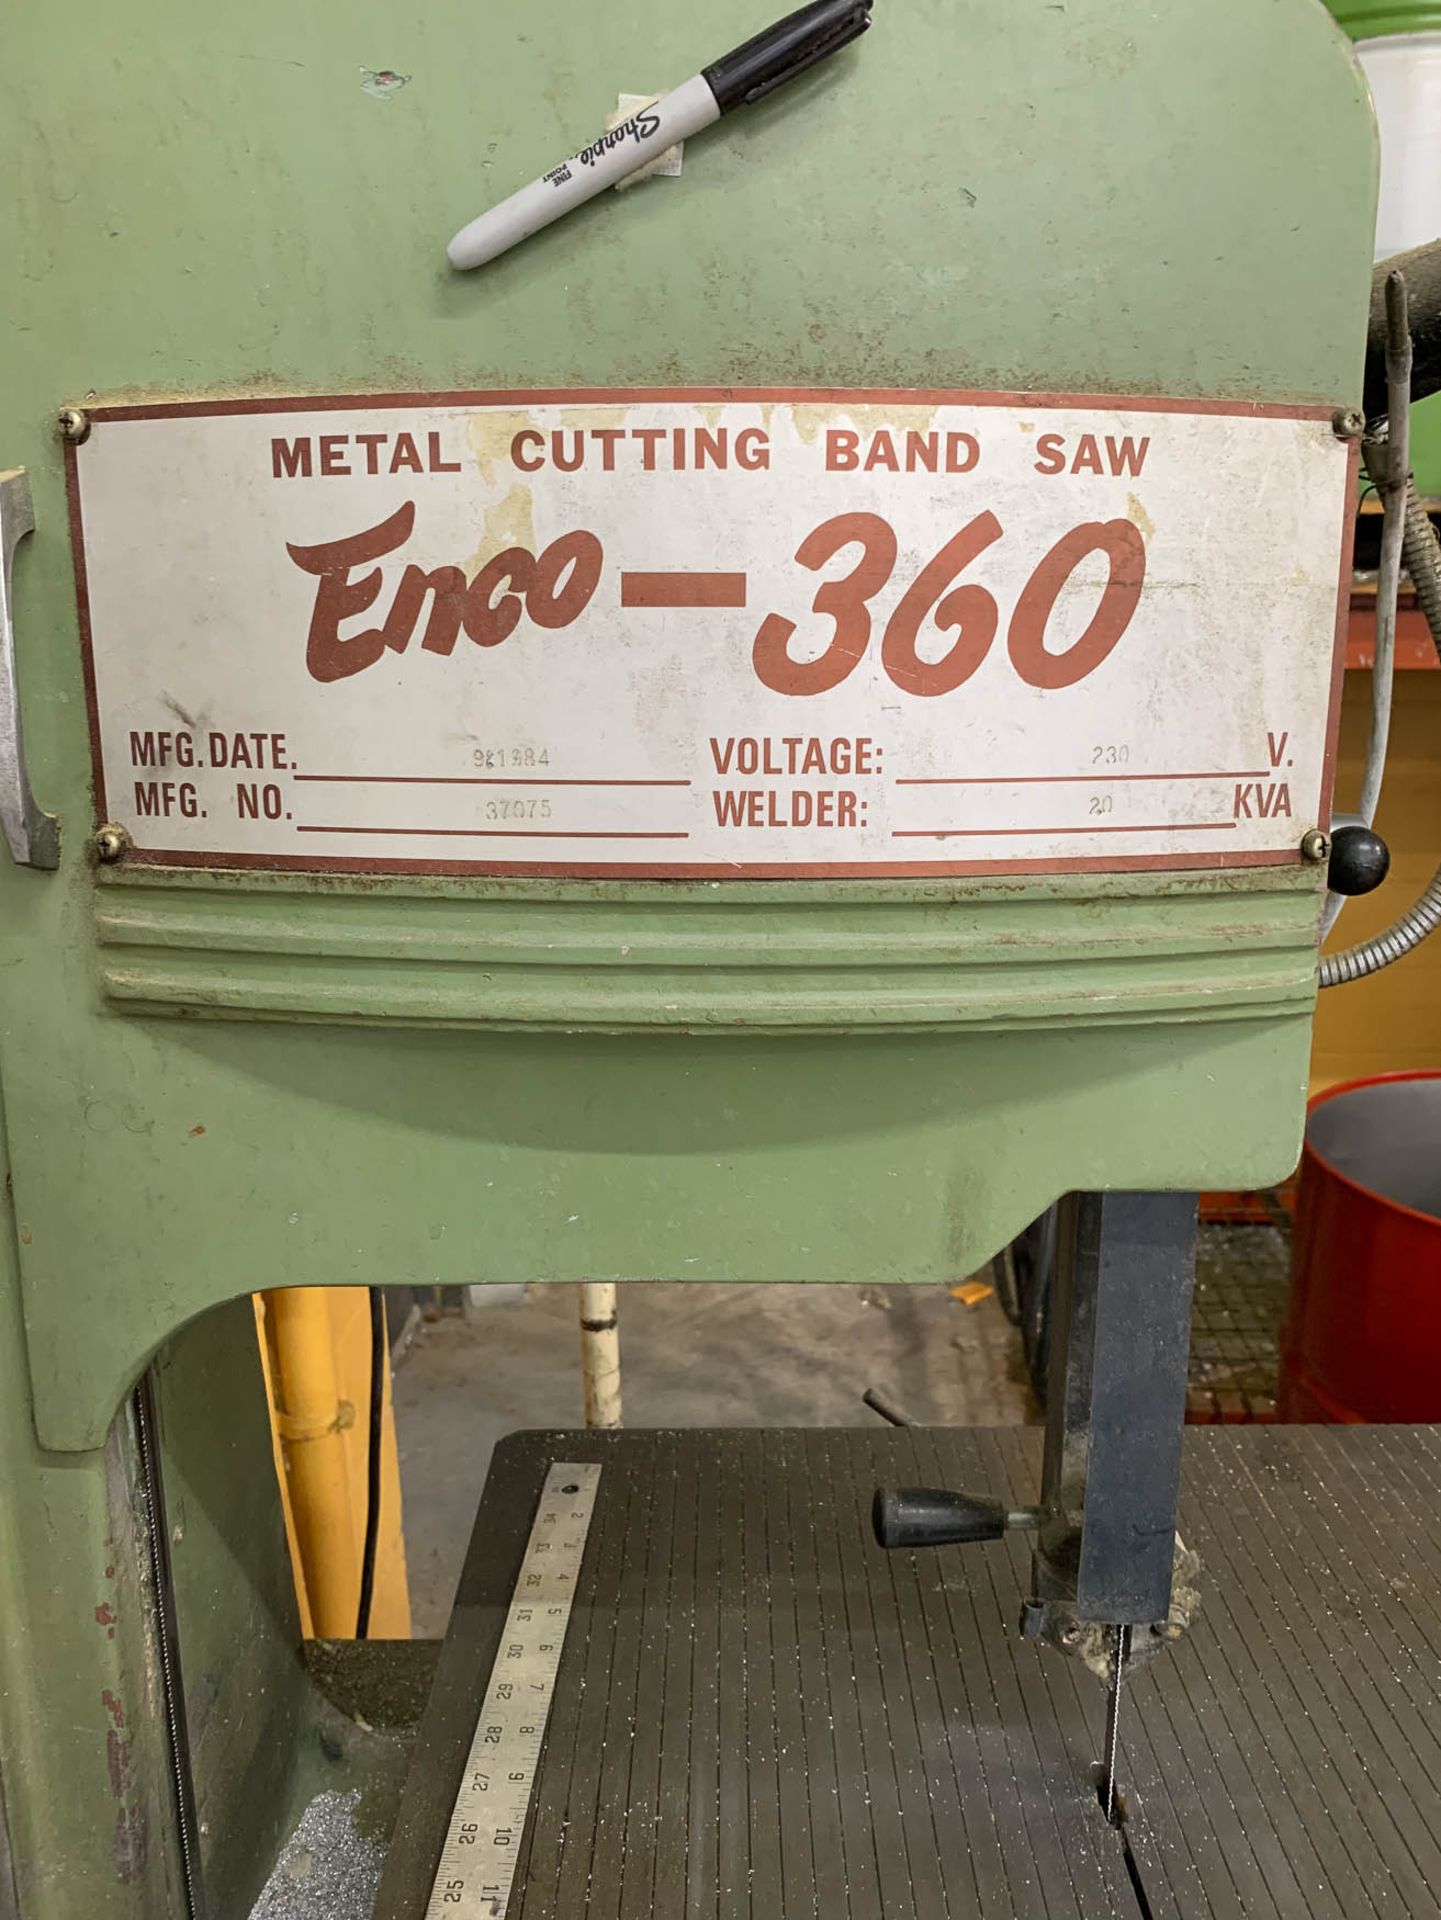 ENCO 360 14" VERTICAL BANDSAW WITH BUTT WELDER ATTACHMENT, S/N: 37075 [1984] - Image 3 of 3